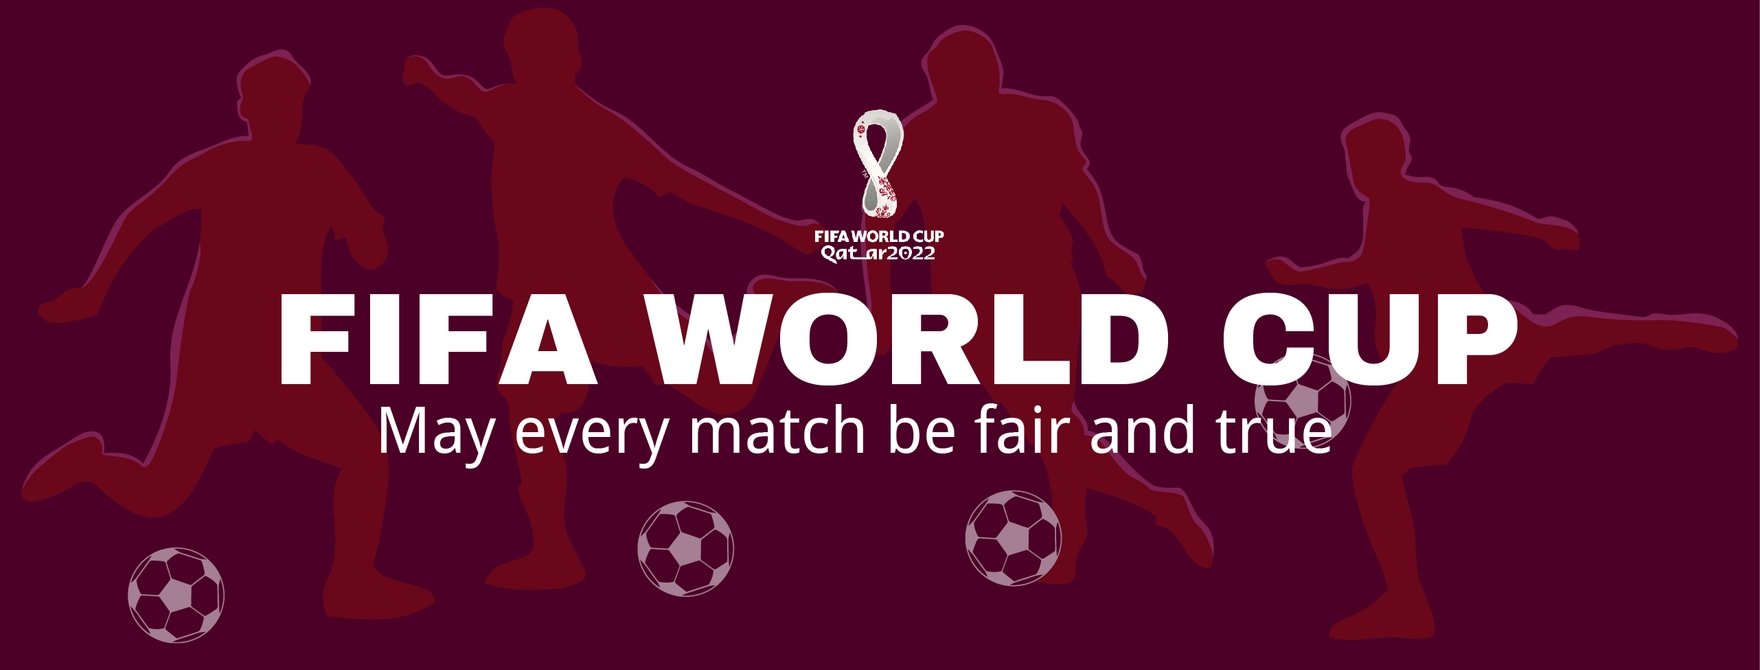 World Cup 2022 Facebook Cover Banner